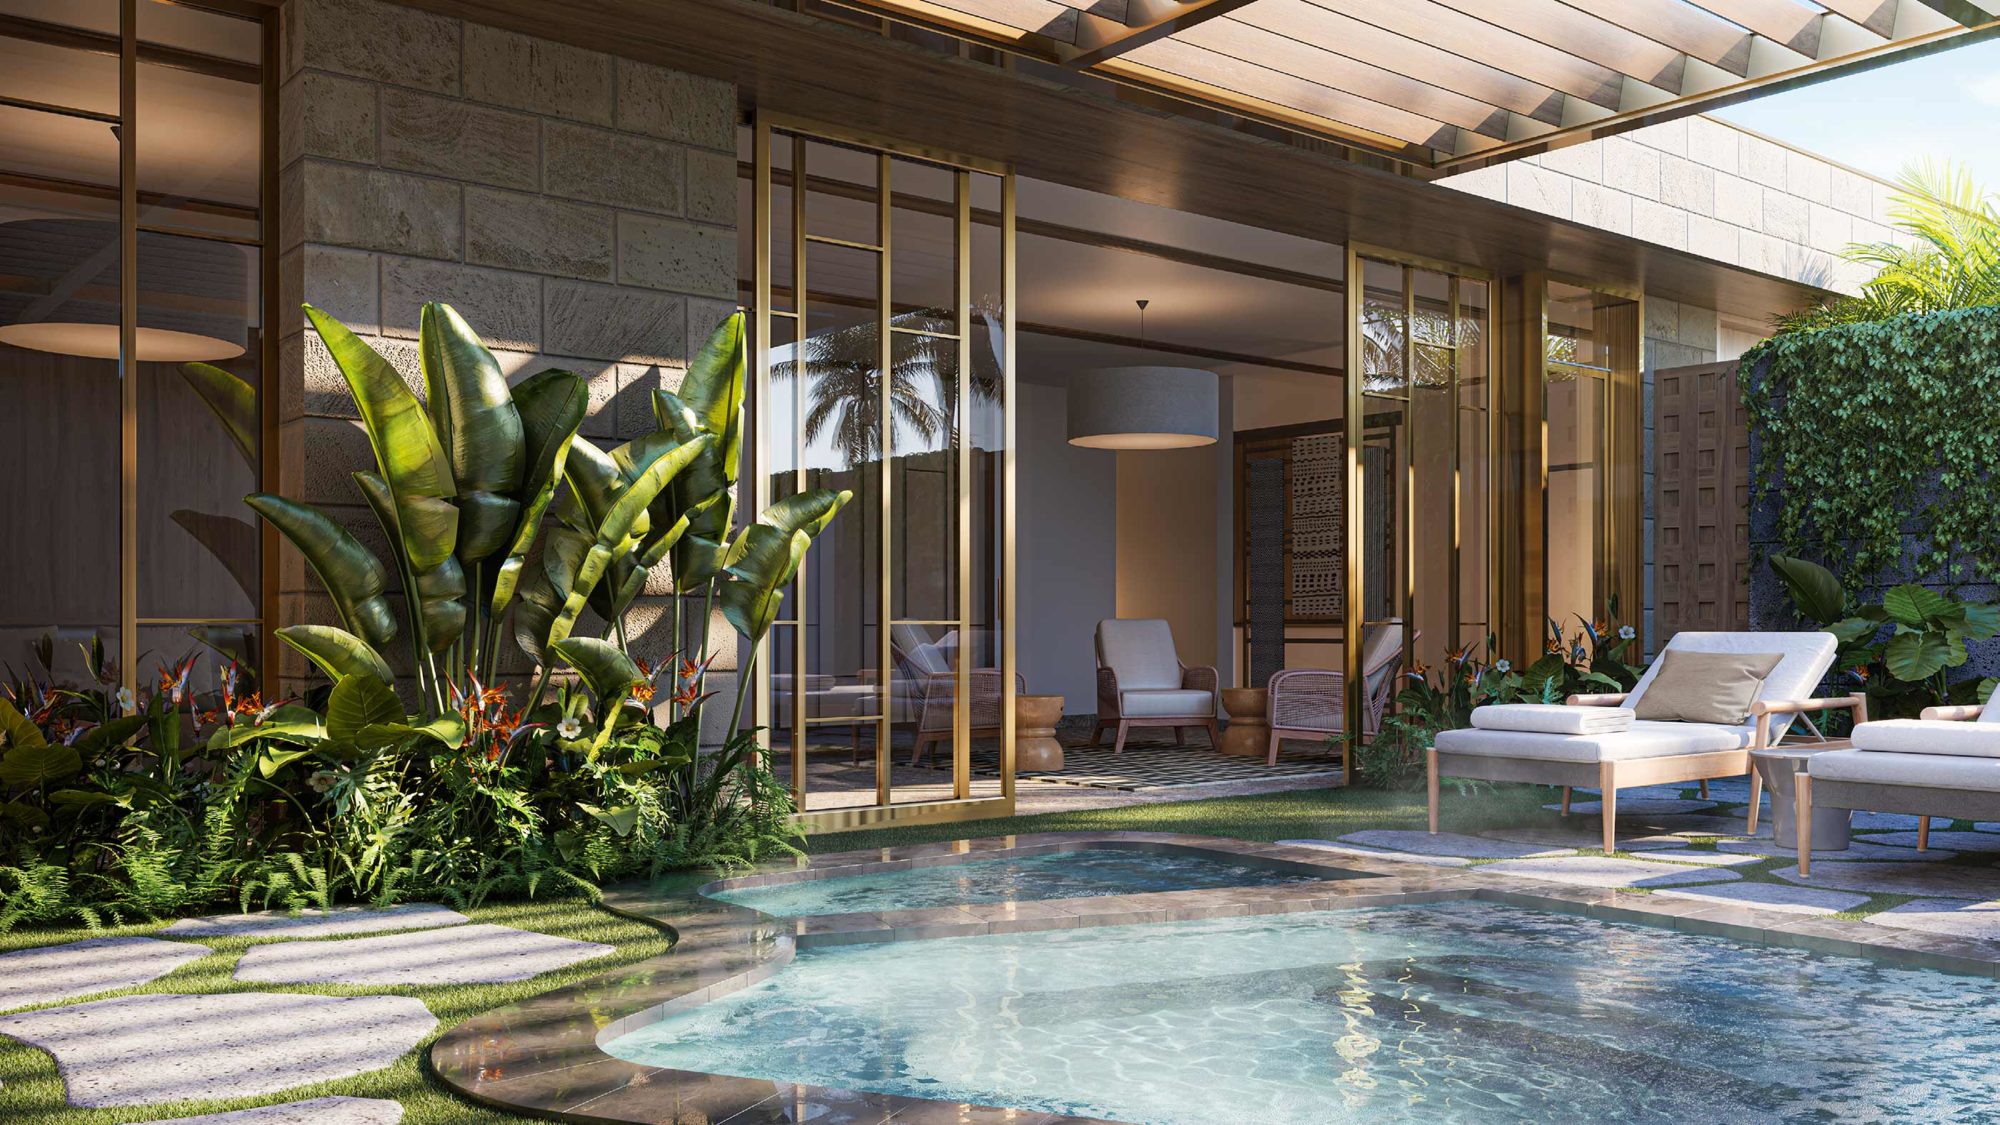 Spa Lounge amenity showing outdoor plunge pool and indoor lounge seating area